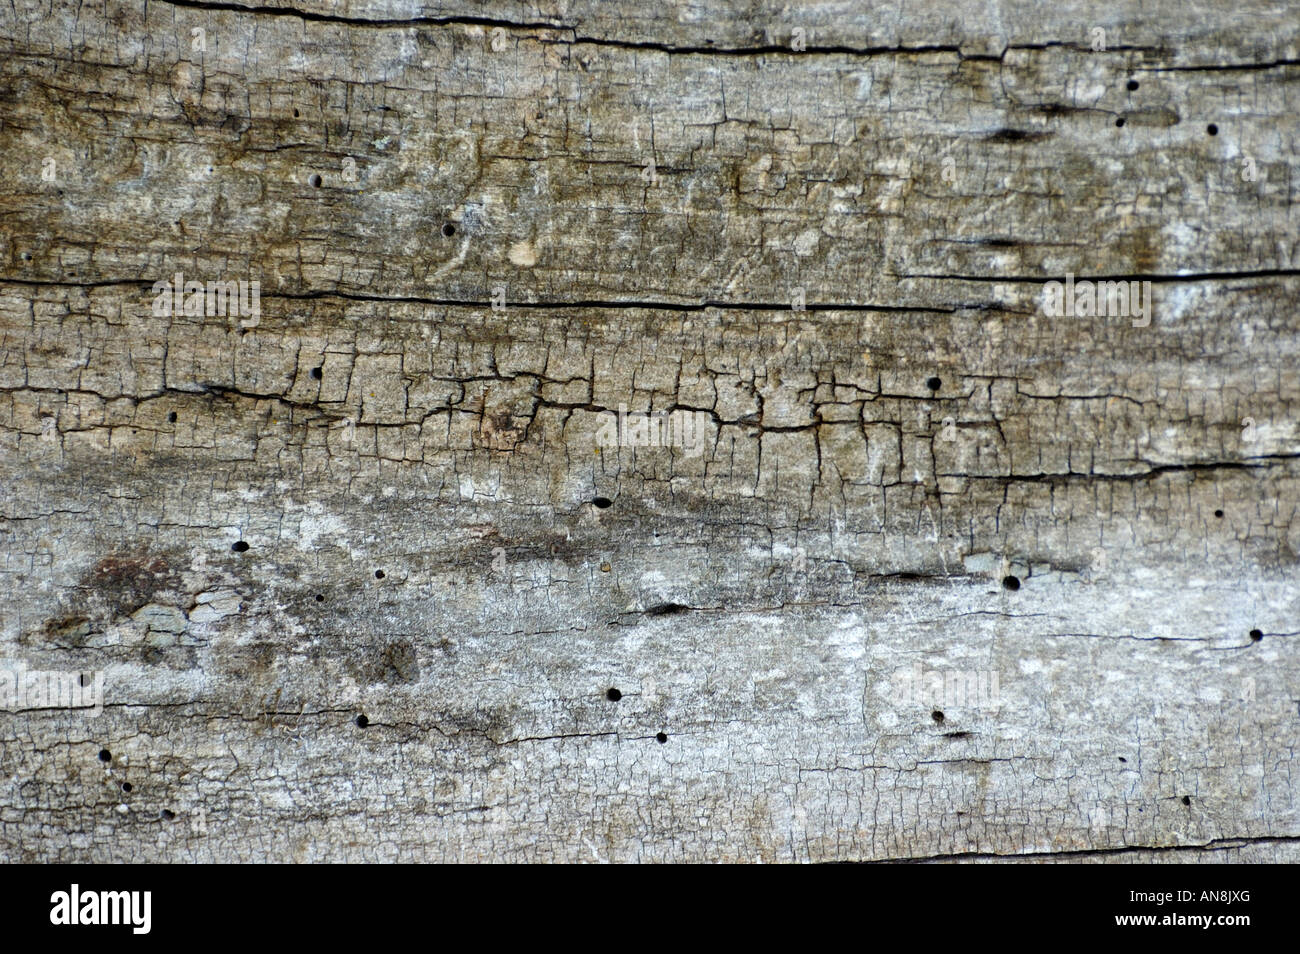 Stock image of texture and patterns in weathered and cracked wood with small worm holes Stock Photo